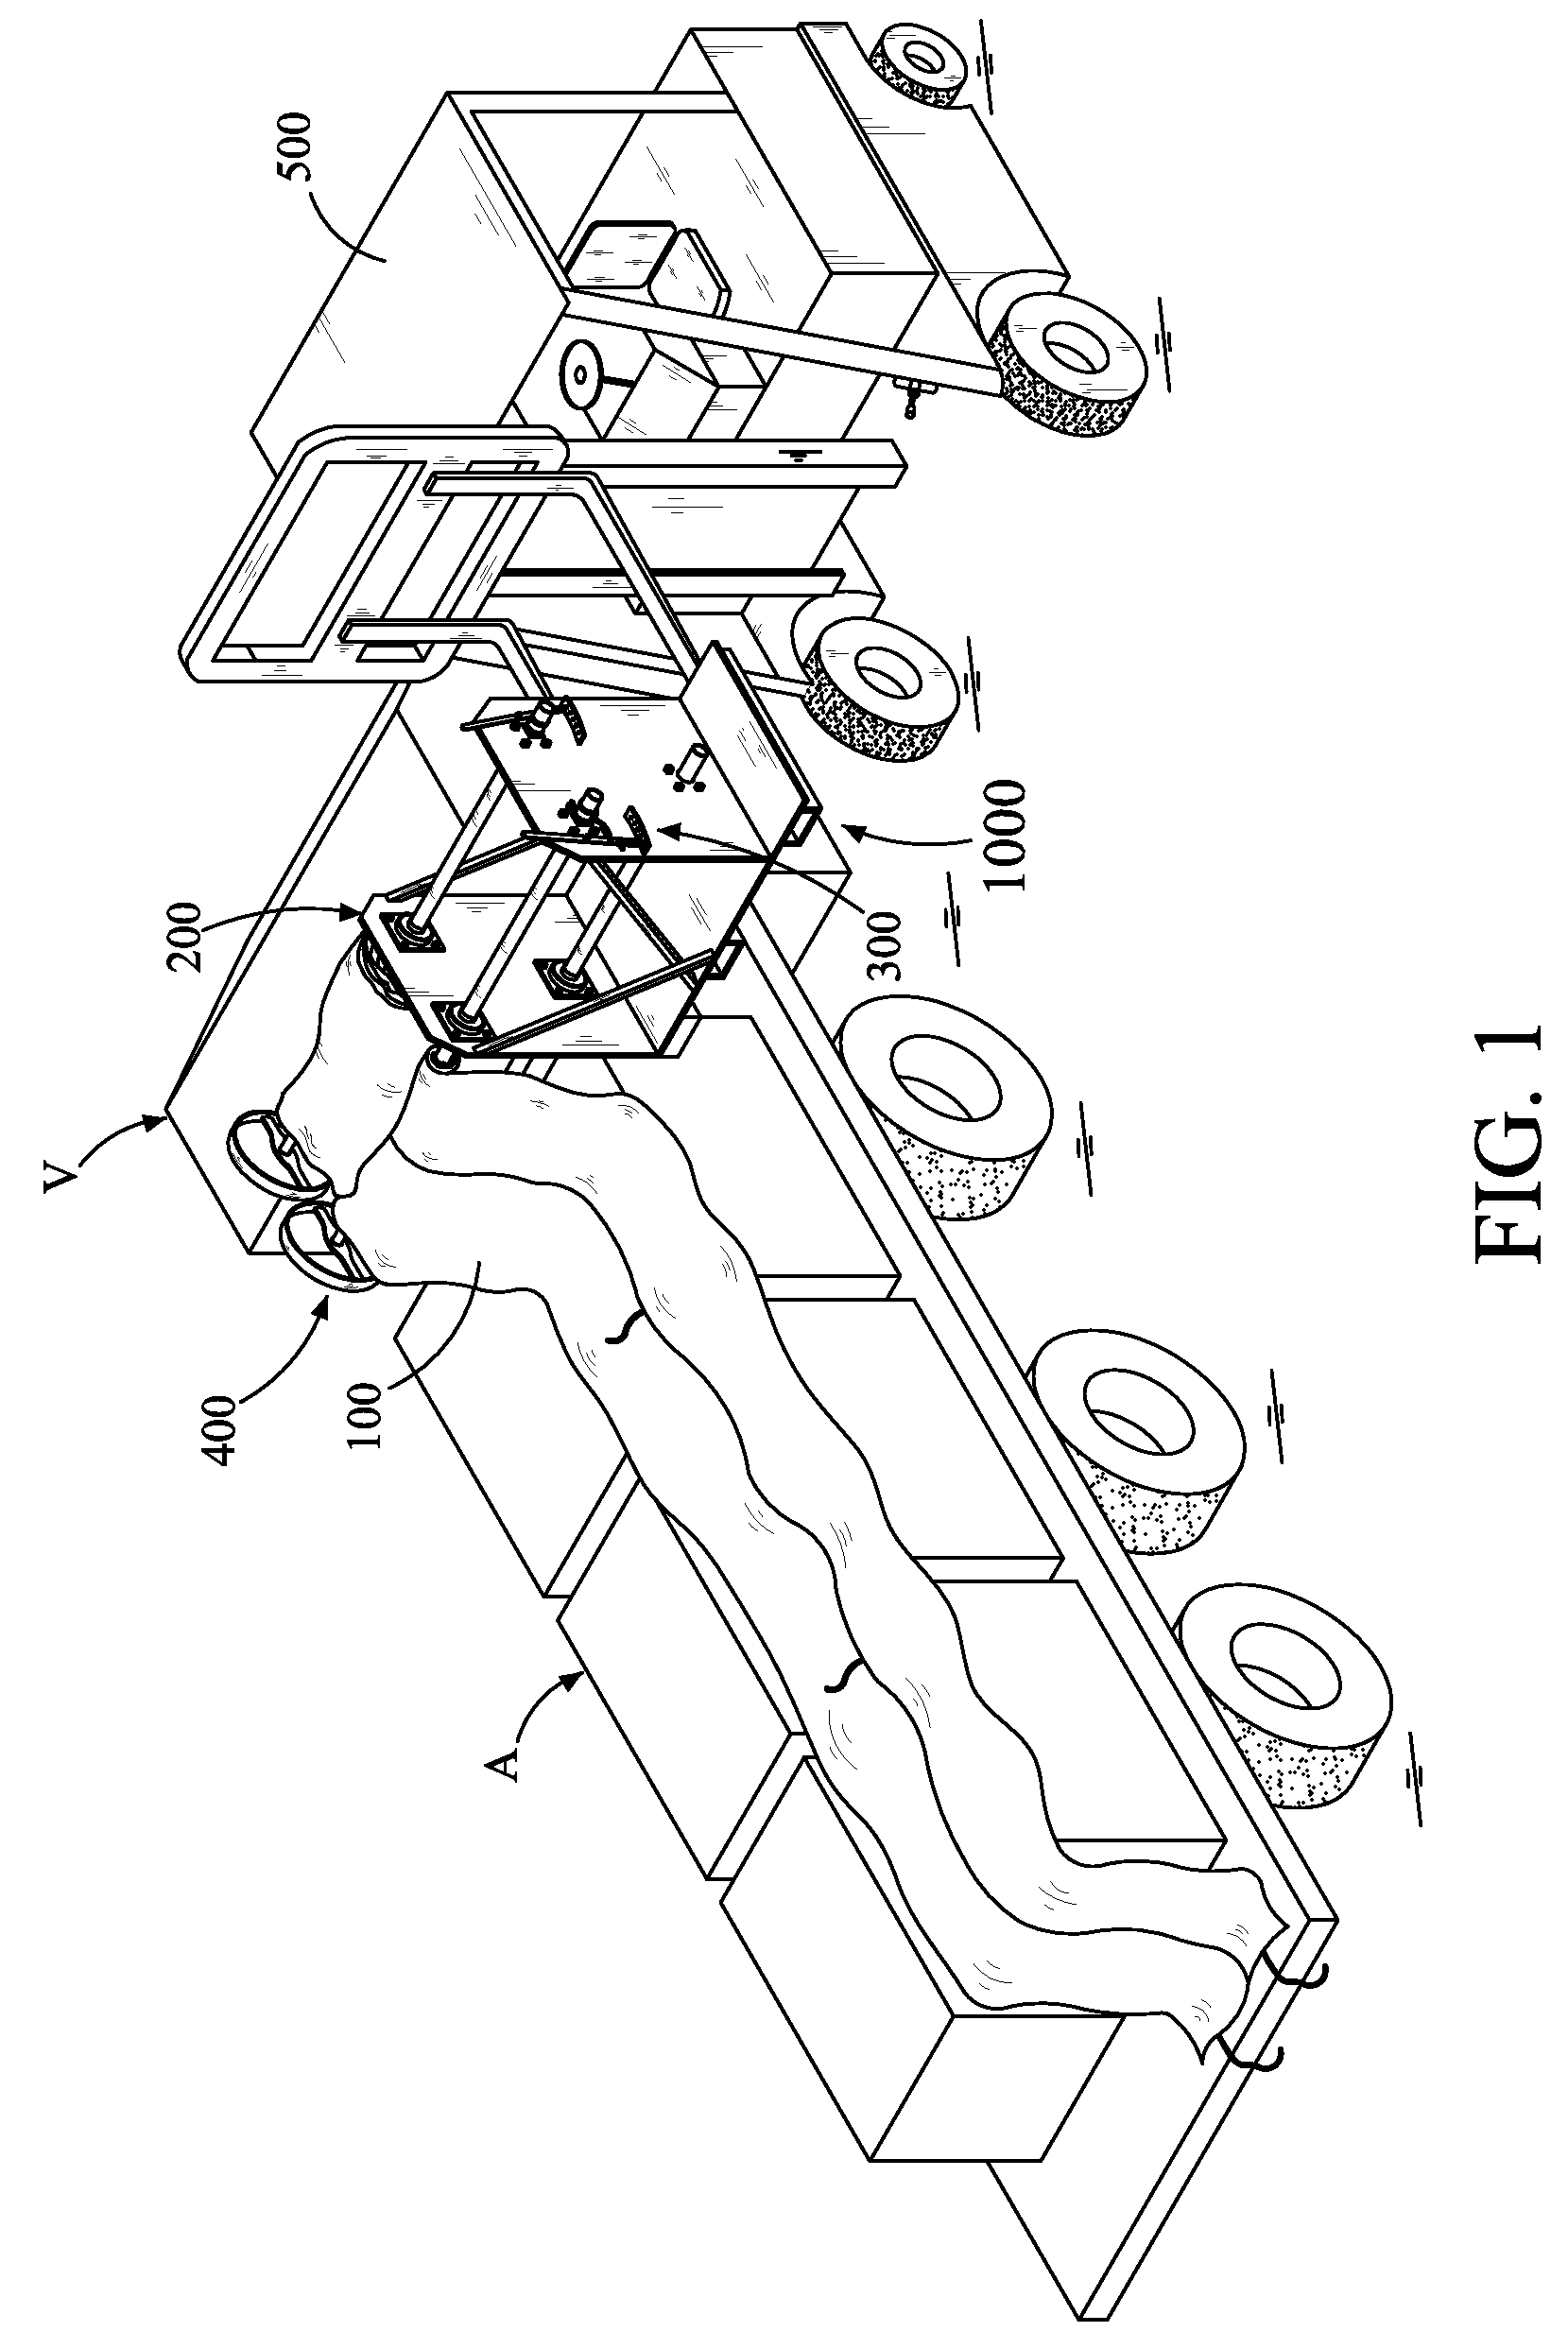 Device for applying sheet material and method thereof